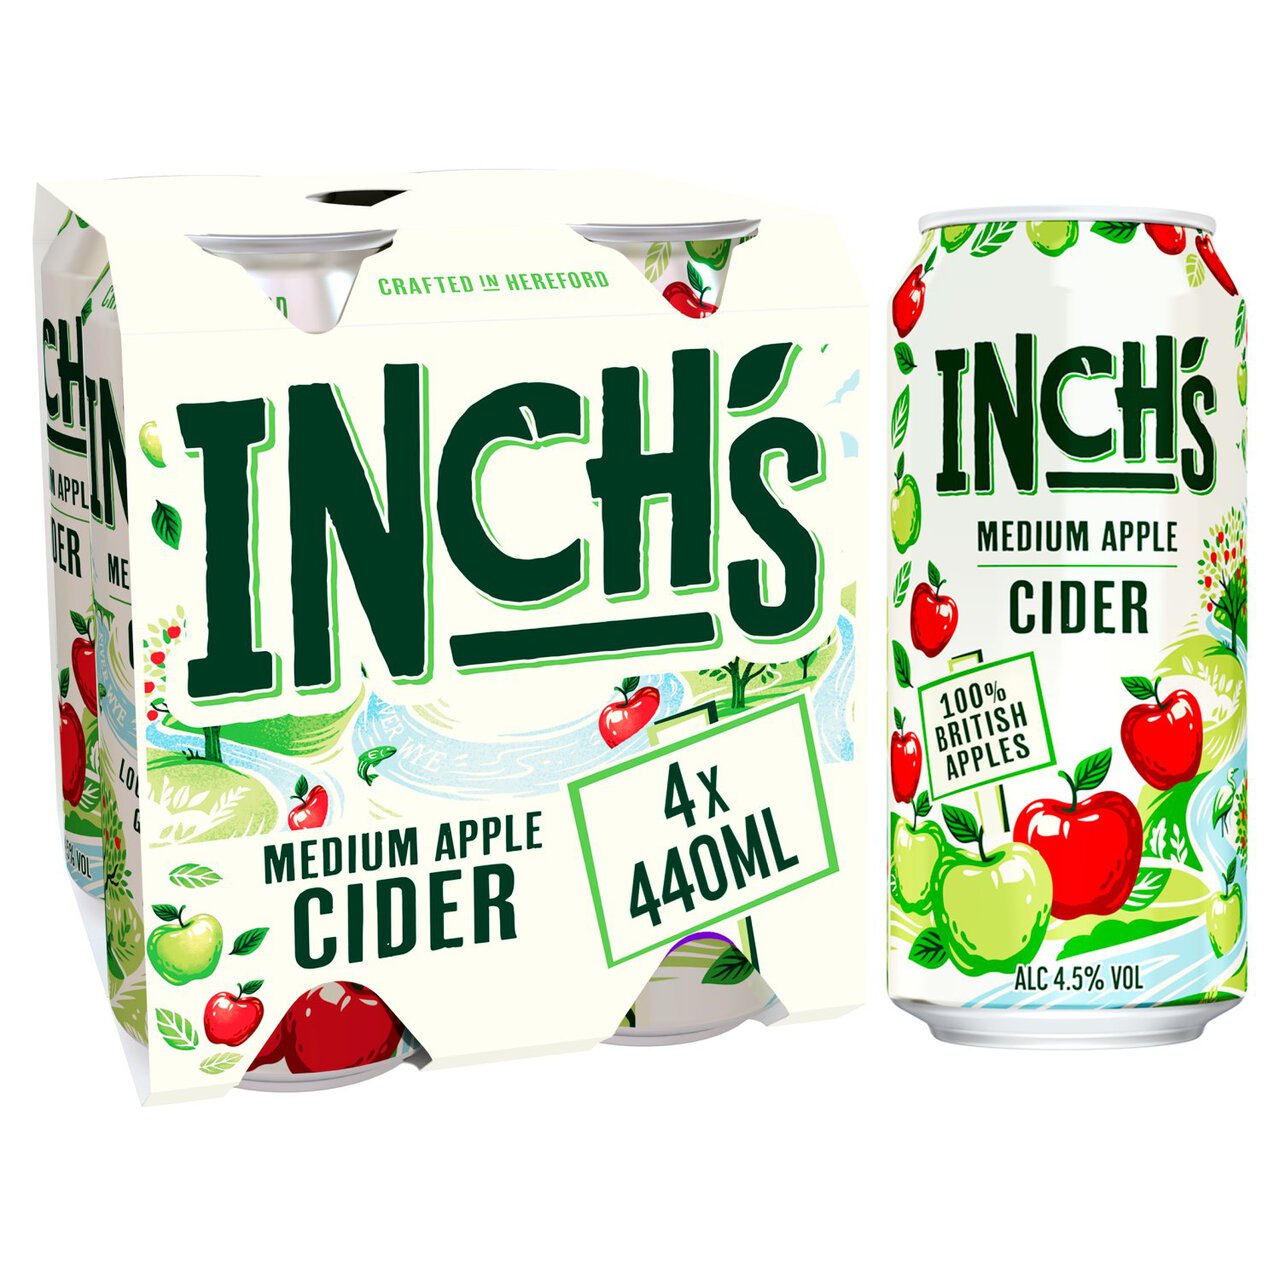 Inch's Apple Cider Cans 4 x 440ml